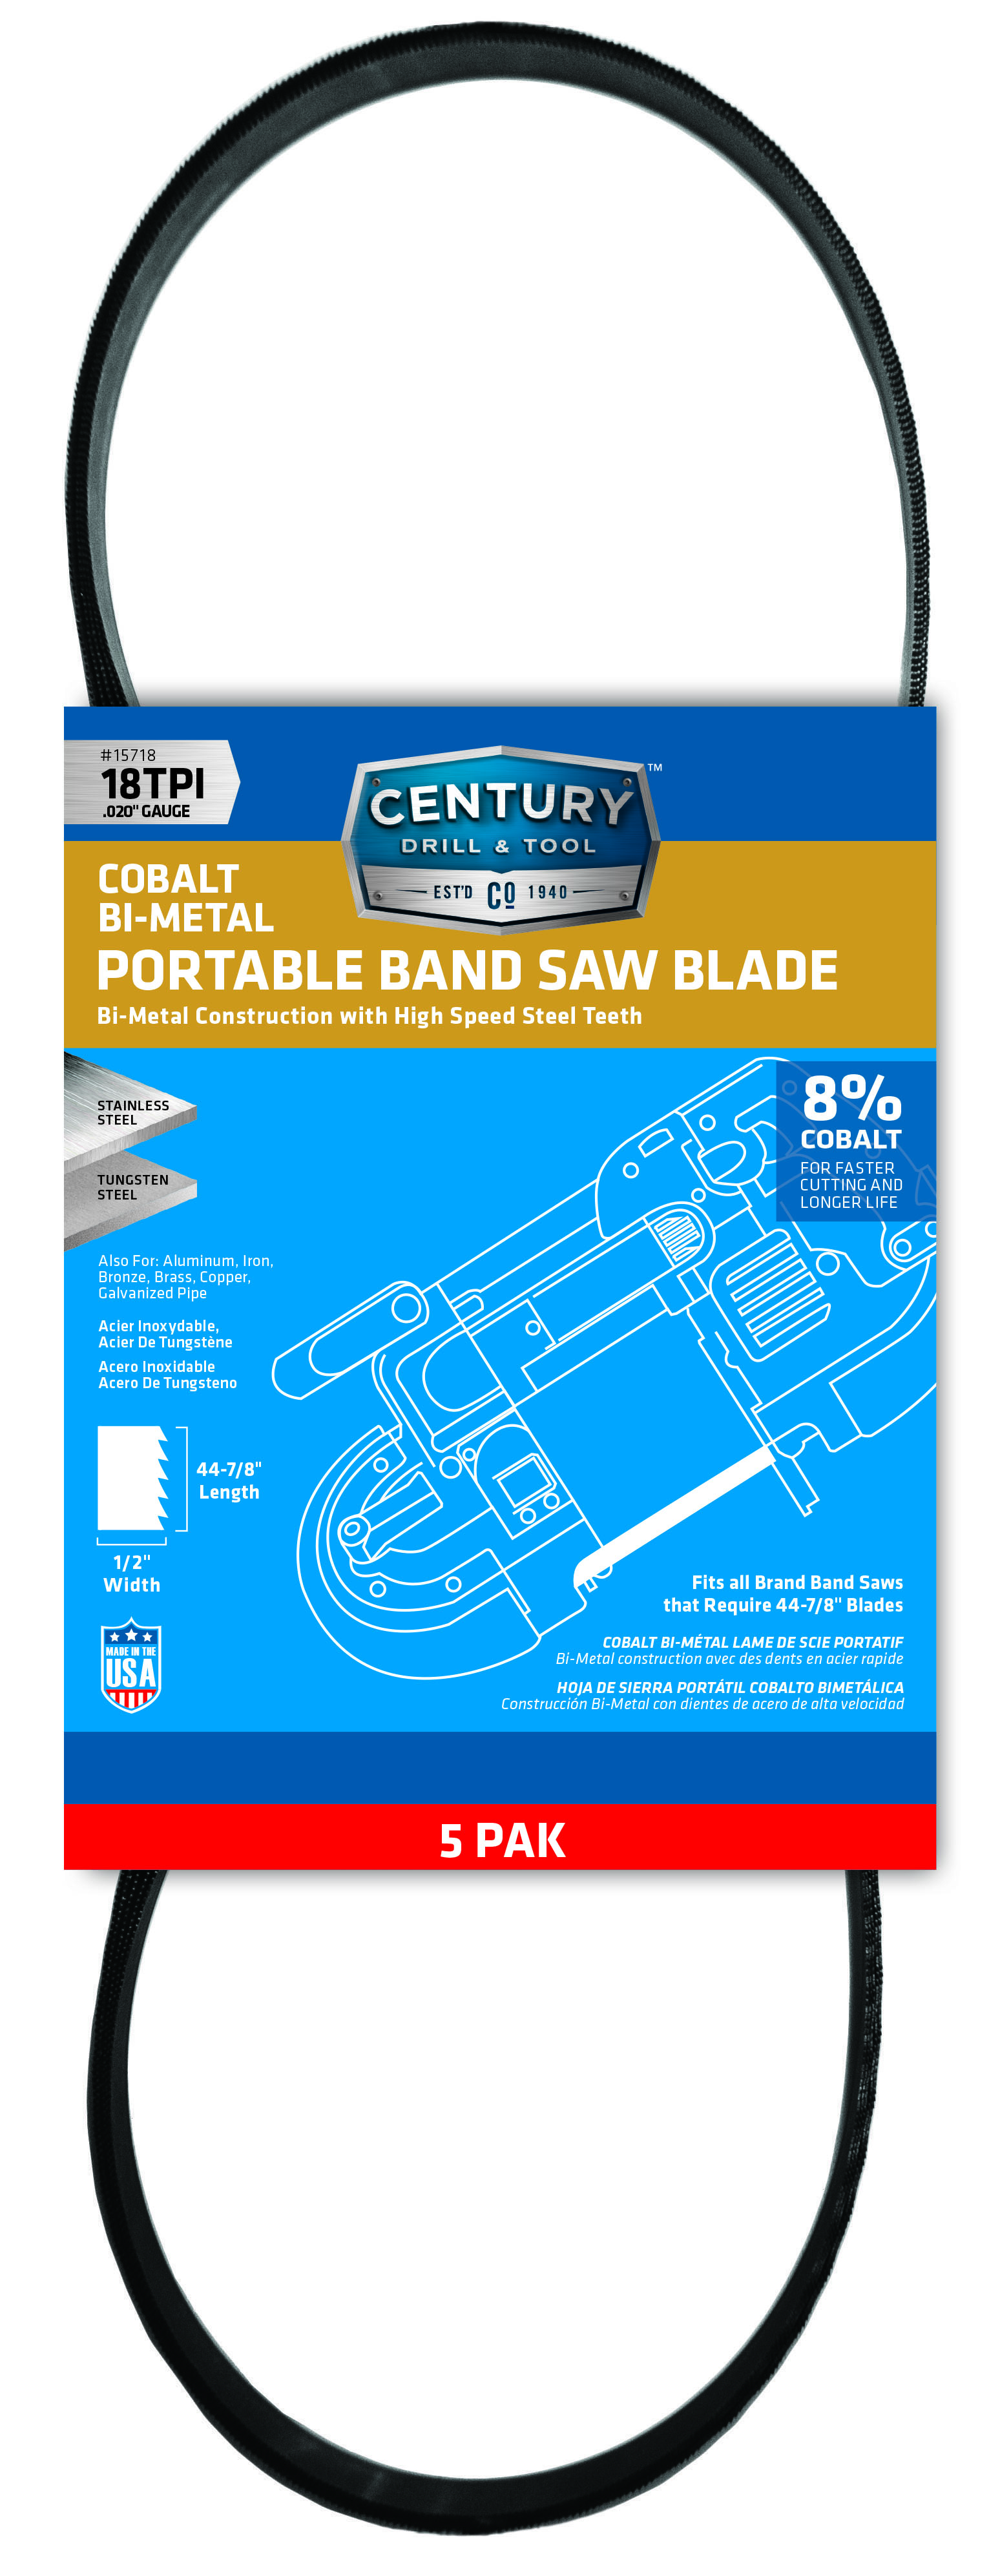 Century Drill & Tool - 18T PORTA BAND SAW 5-PACK -  15718